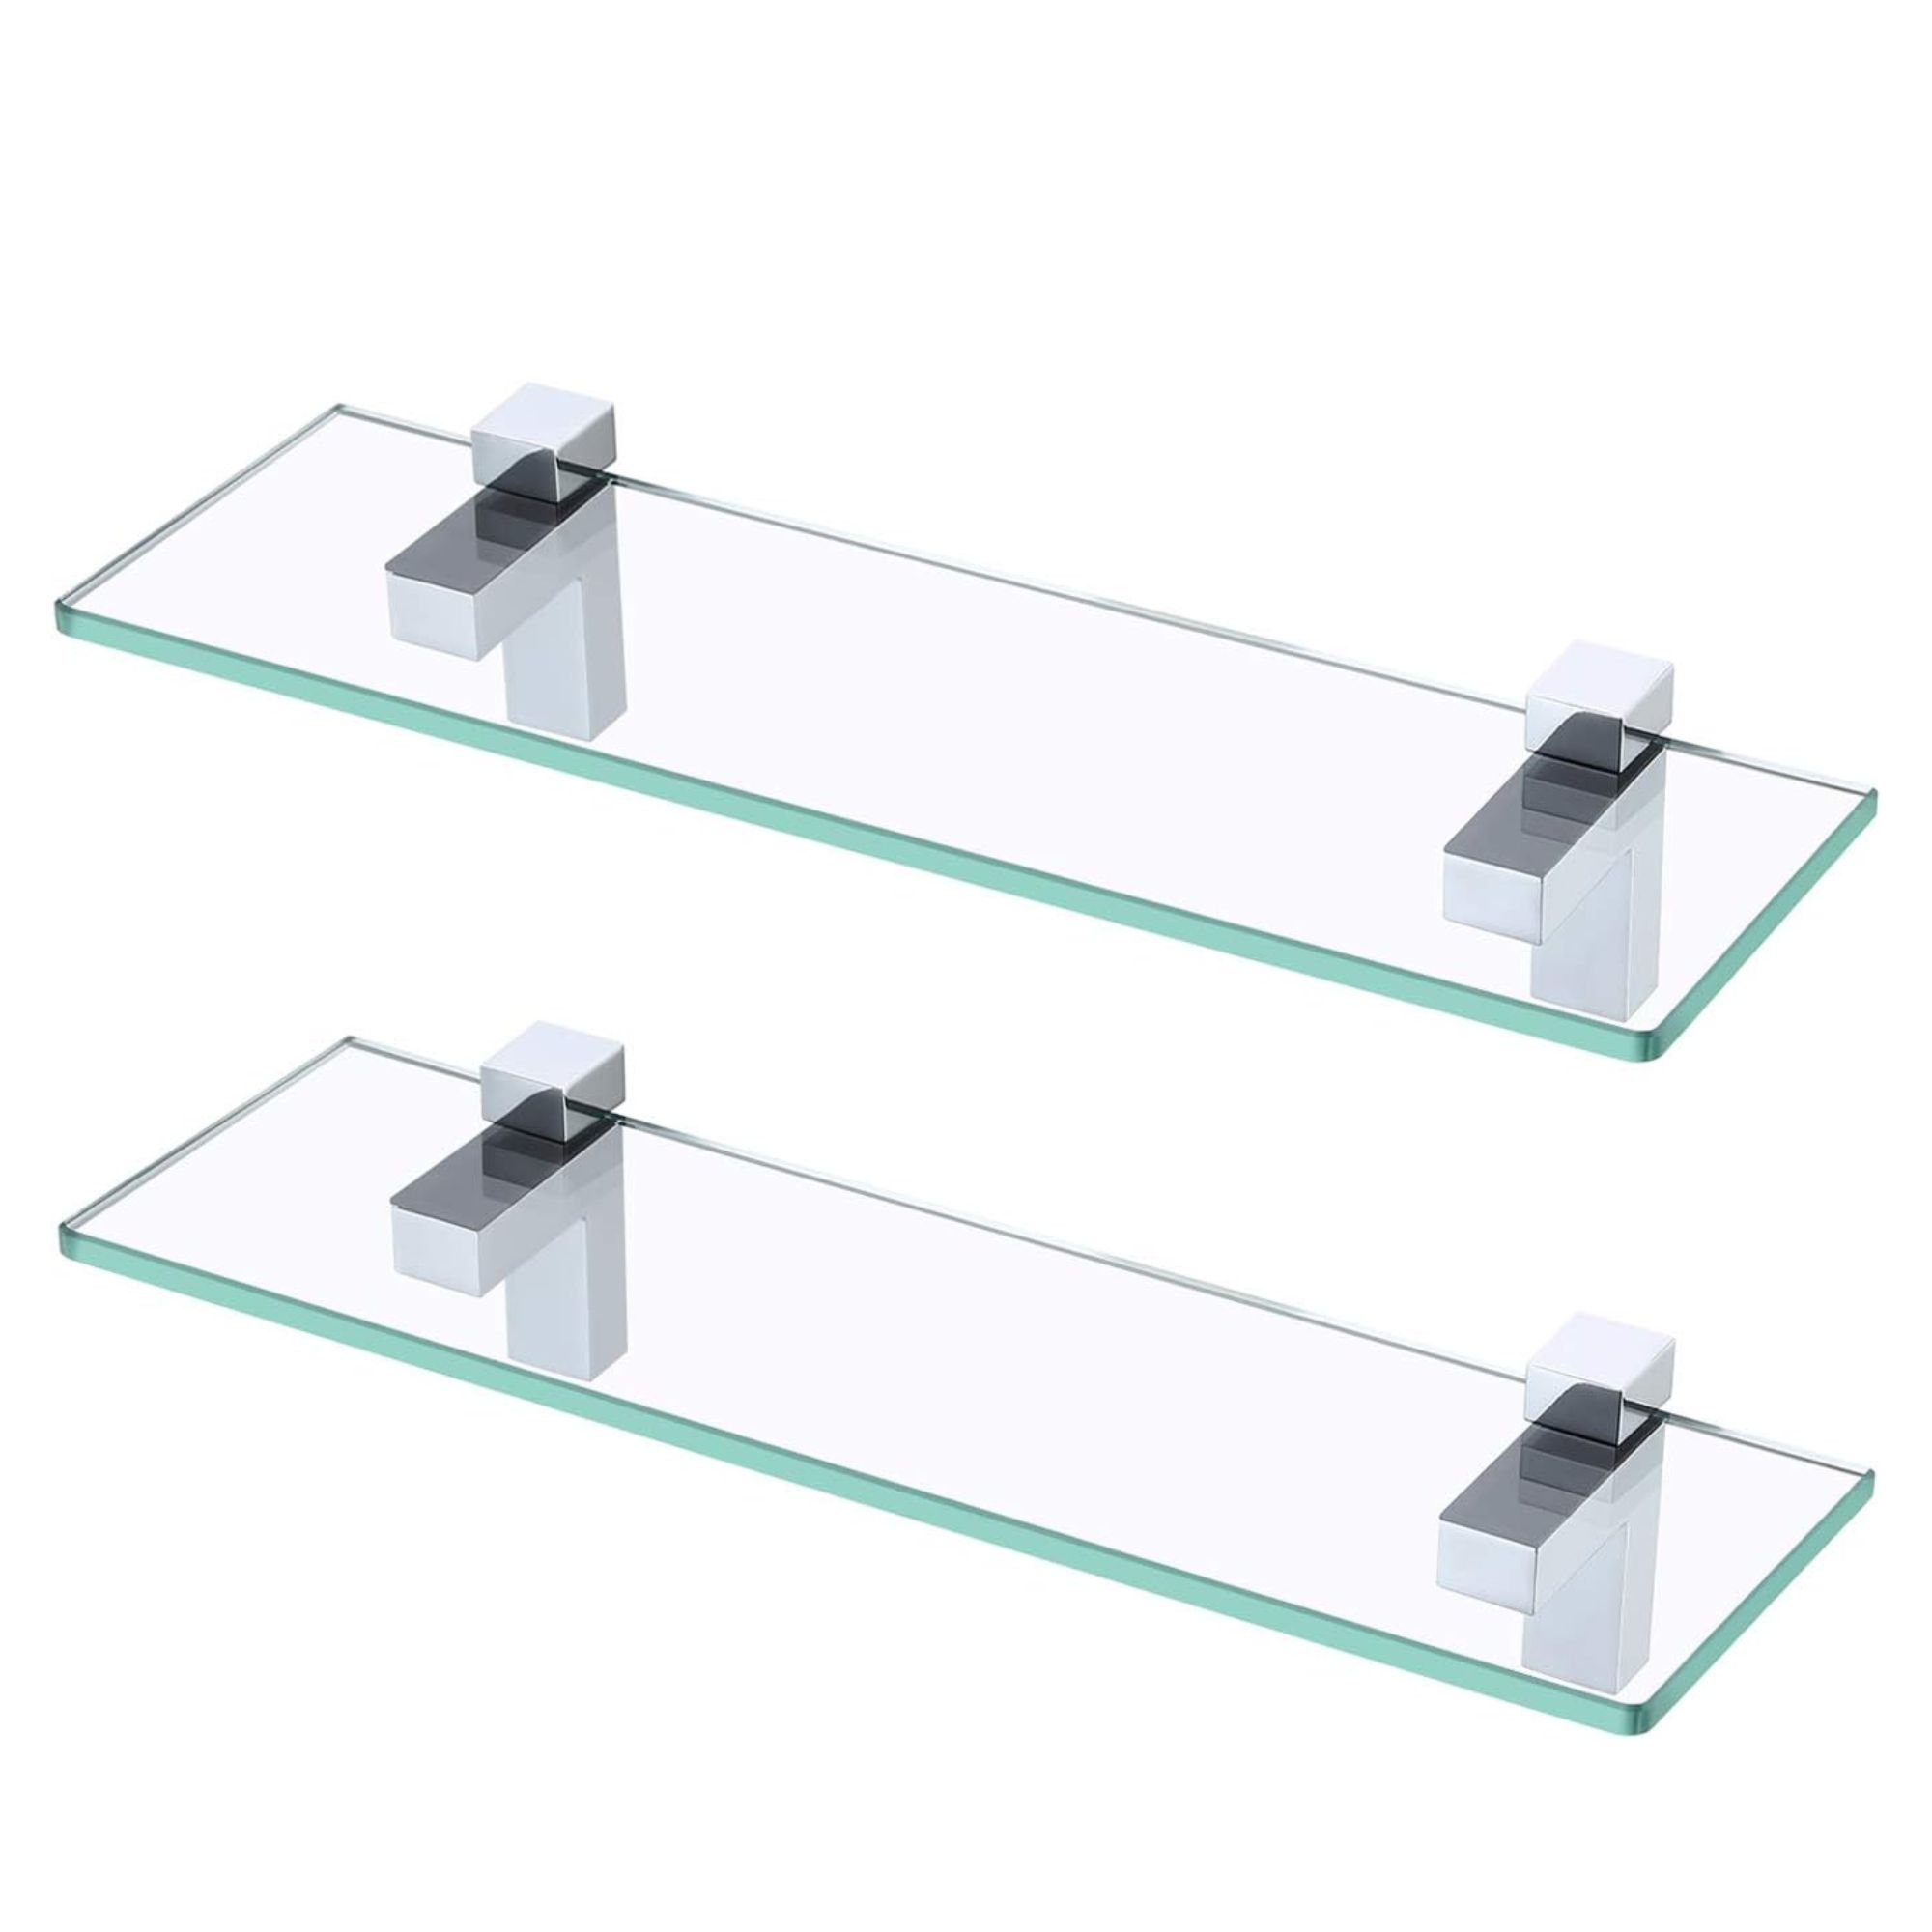 Two rectangular glass shelves with metal brackets